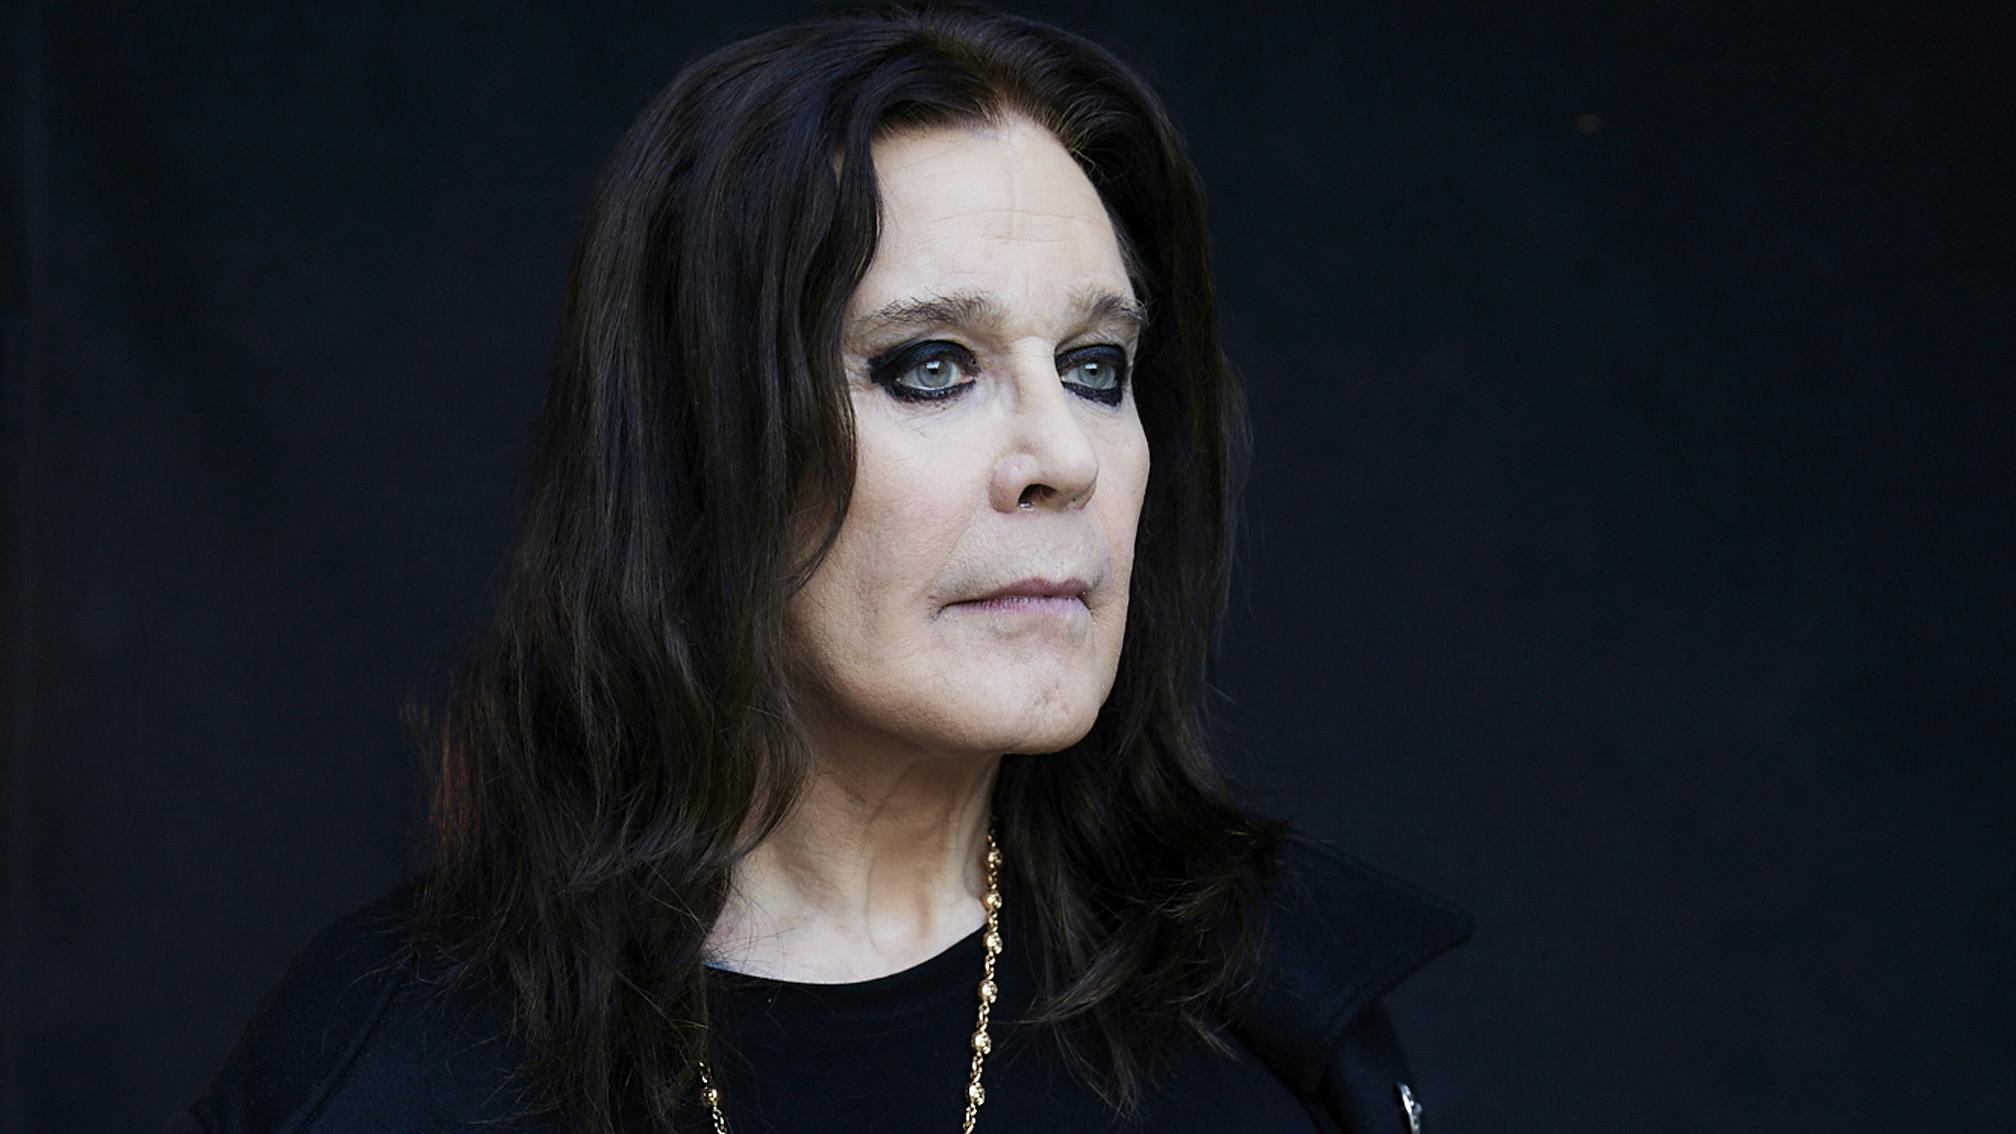 Ozzy Osbourne Has Canceled His 2020 North American Tour